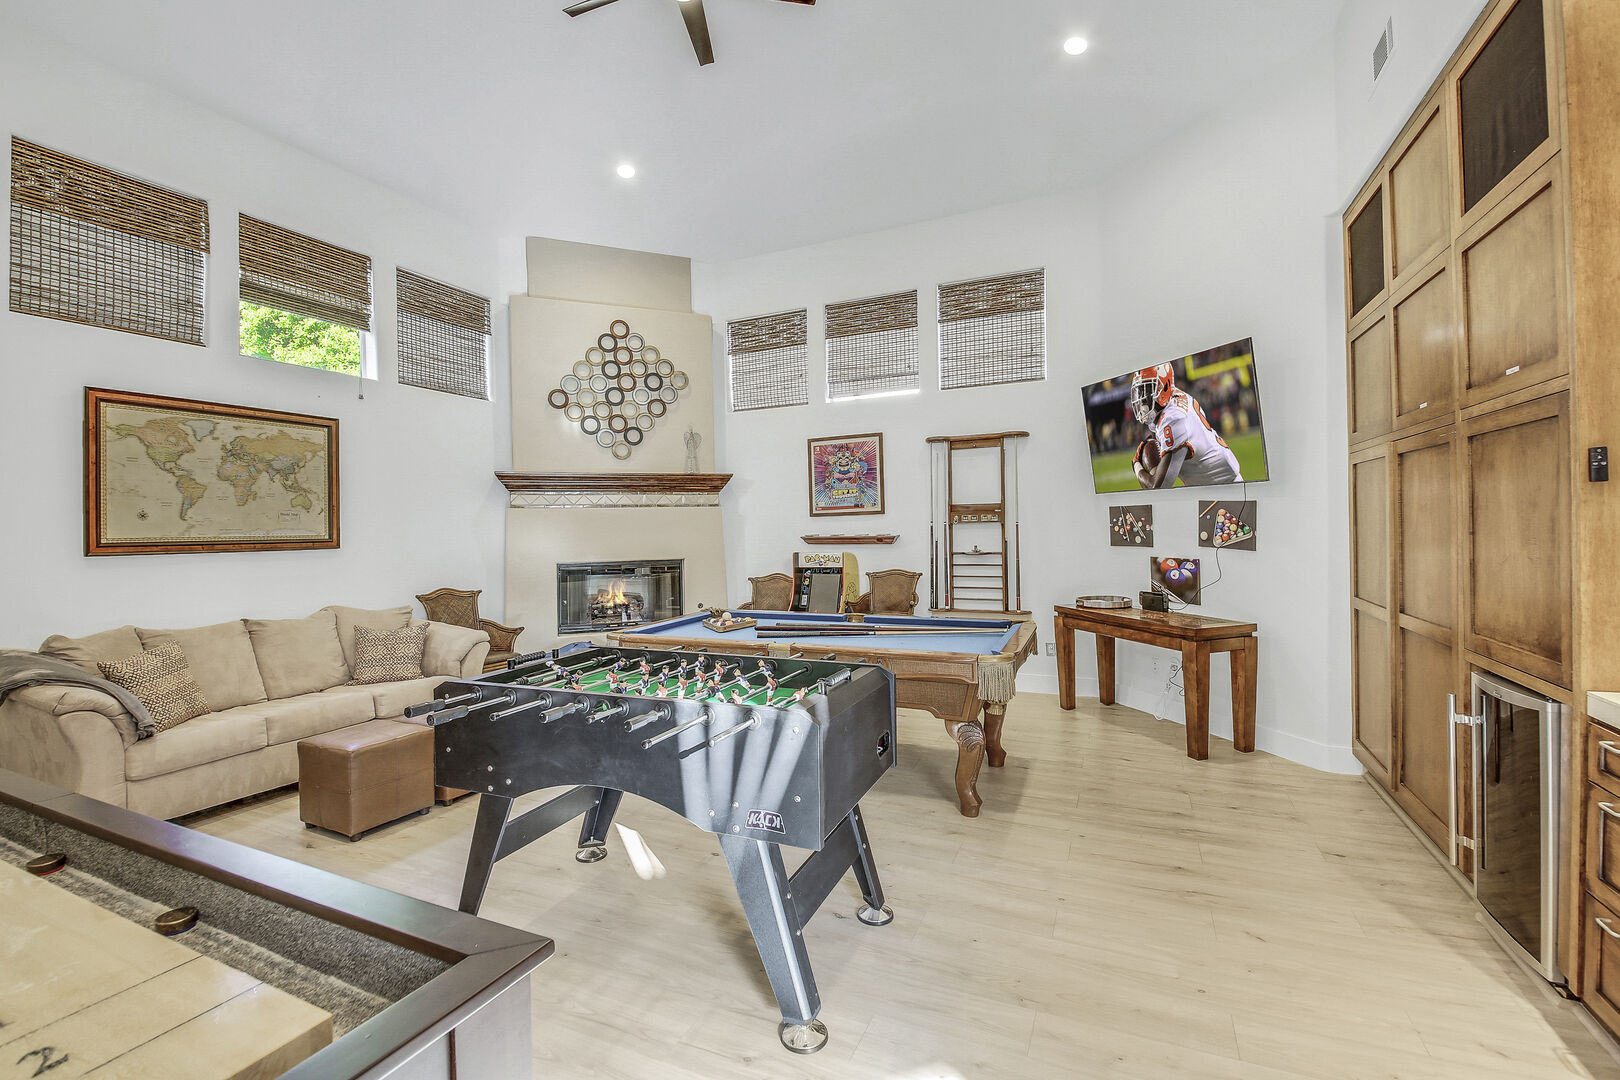 The Family Room is where all the fun will take place.